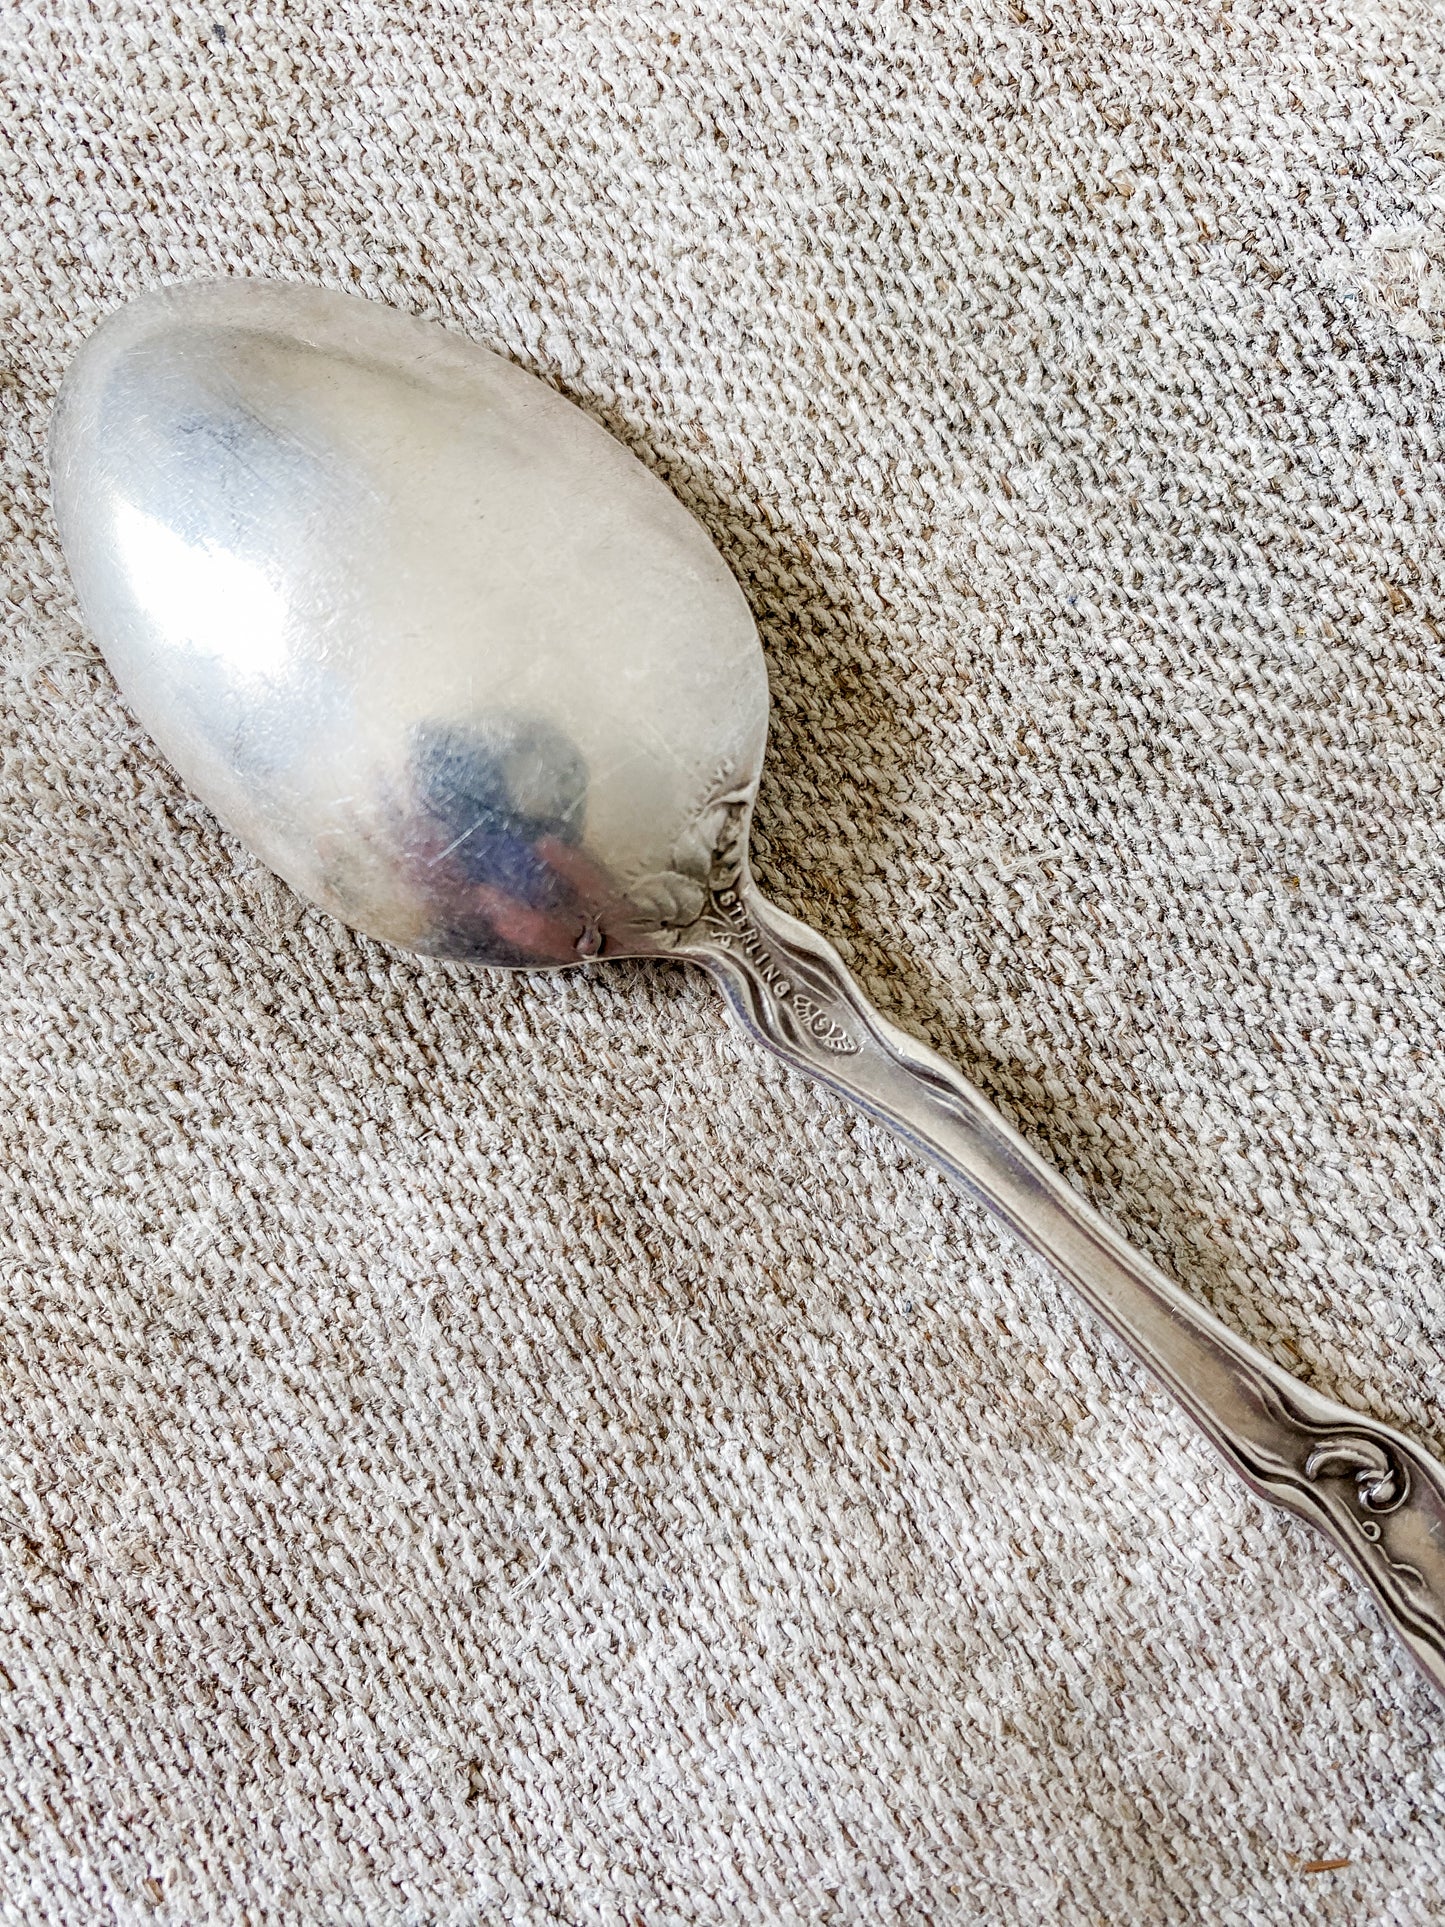 Antique Early 1900s Sterling Silver Souvenir Spoons